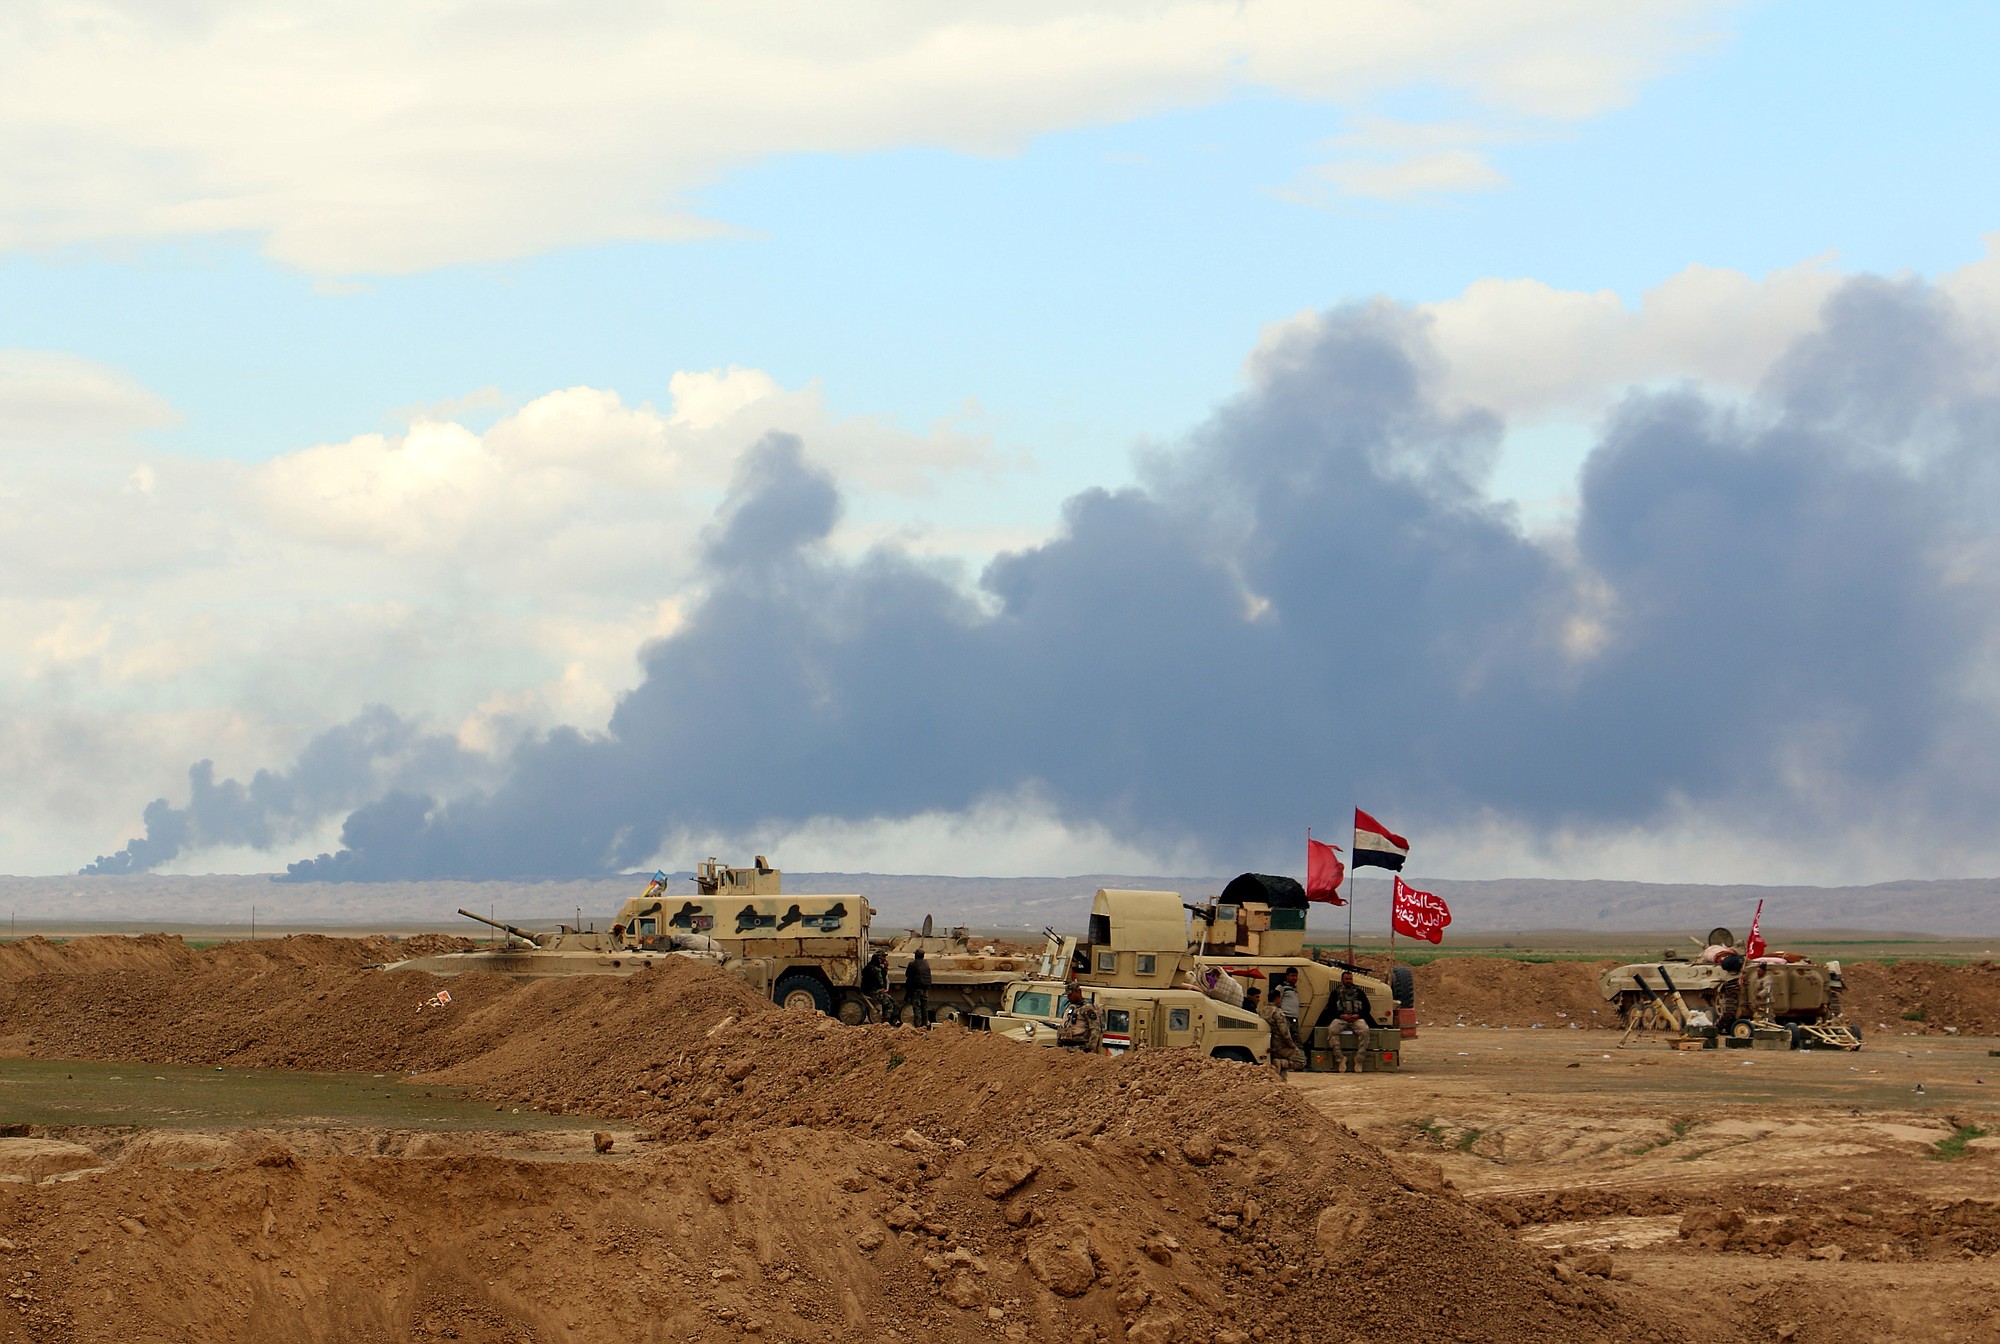 In this Wednesday, March 4, 2015 photo, smoke rises as the Iraqi army, supported by volunteers, battles Islamic State extremists outside Tikrit, 80 miles (130 kilometers) north of Baghdad, Iraq. Iranian-backed Shiite militias and Sunni tribes have joined Iraq's military in a major operation to retake Tikrit from the Islamic State group, while the U.S. led coalition has remained on the sidelines.